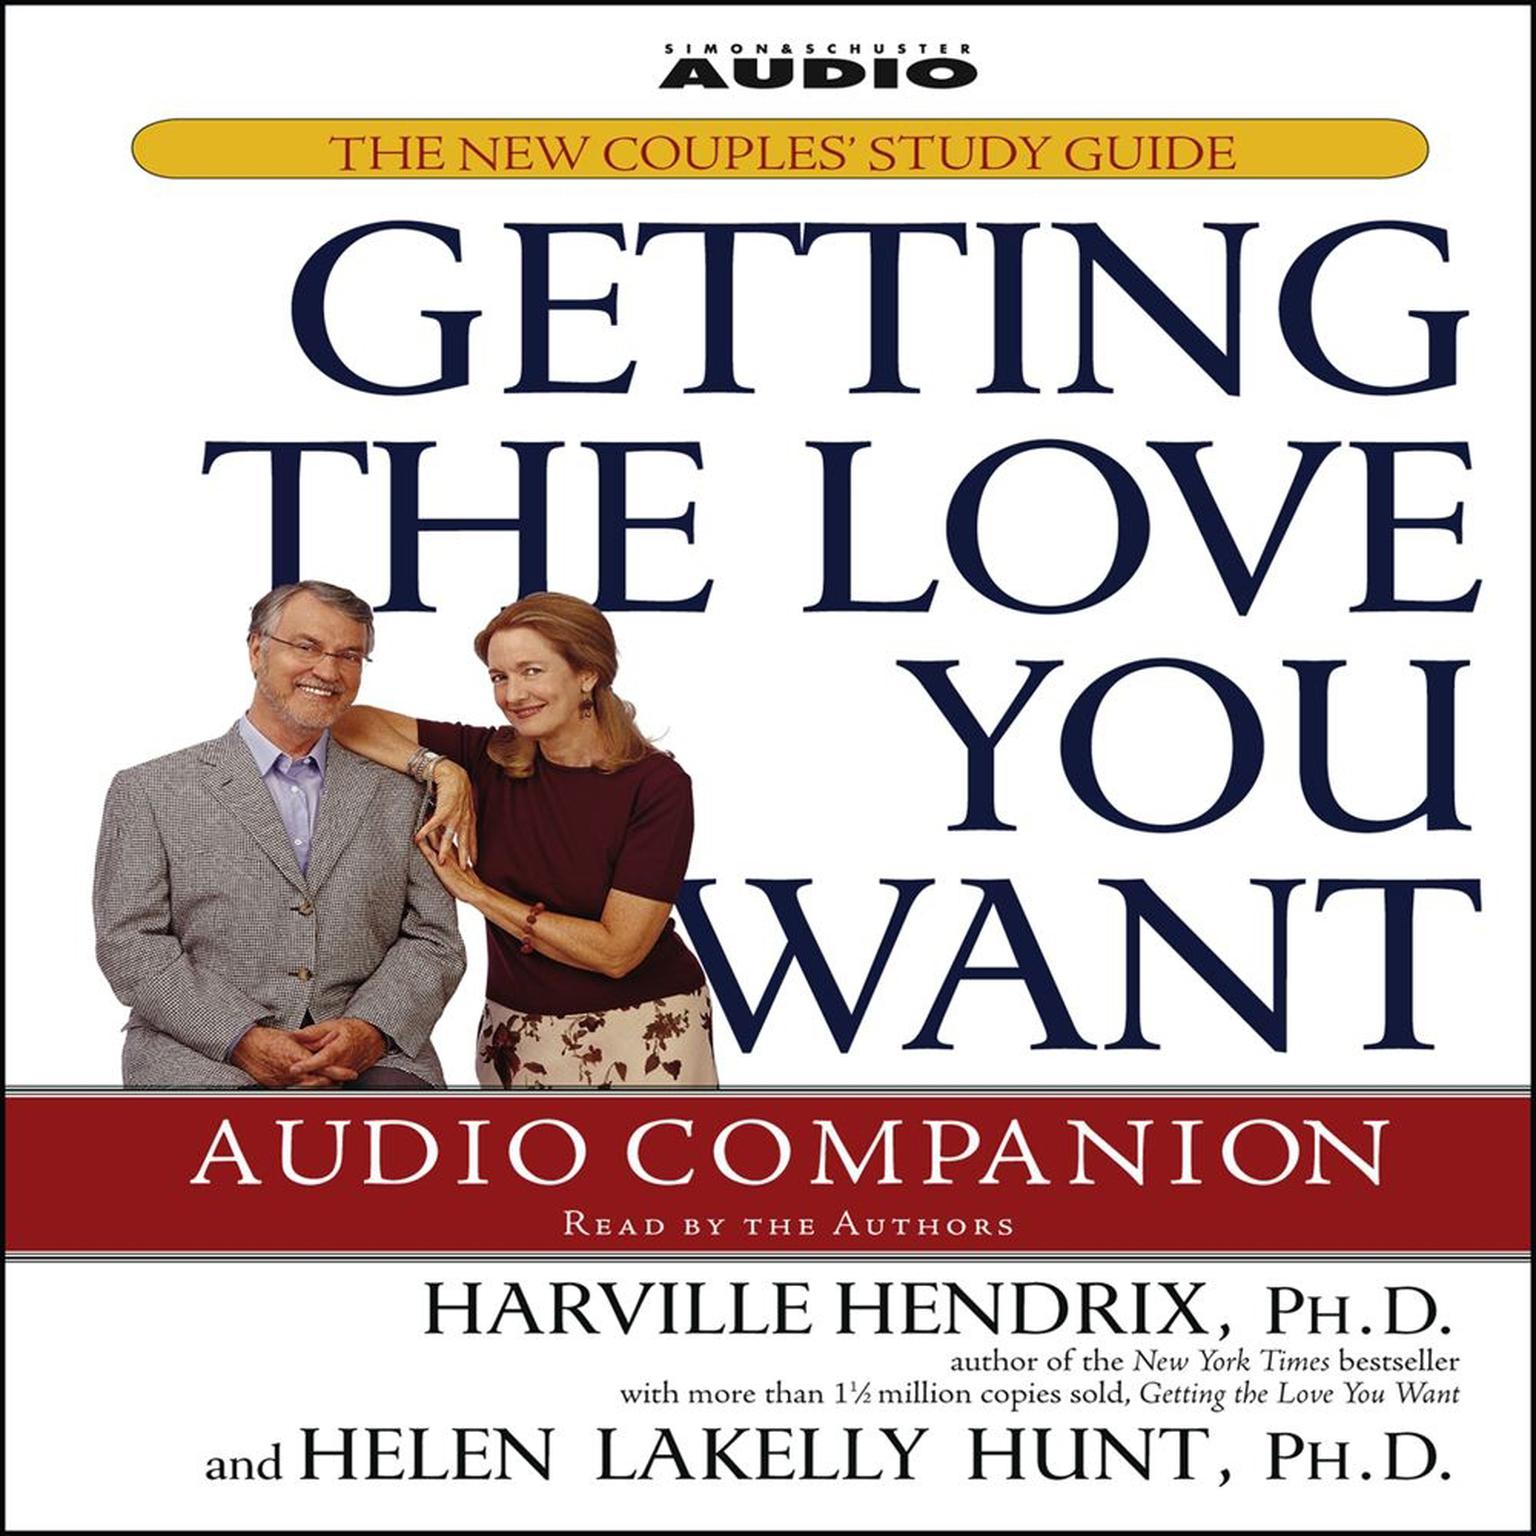 Getting the Love You Want Audio Companion (Abridged): The New Couples Study Guide Audiobook, by Harville Hendrix